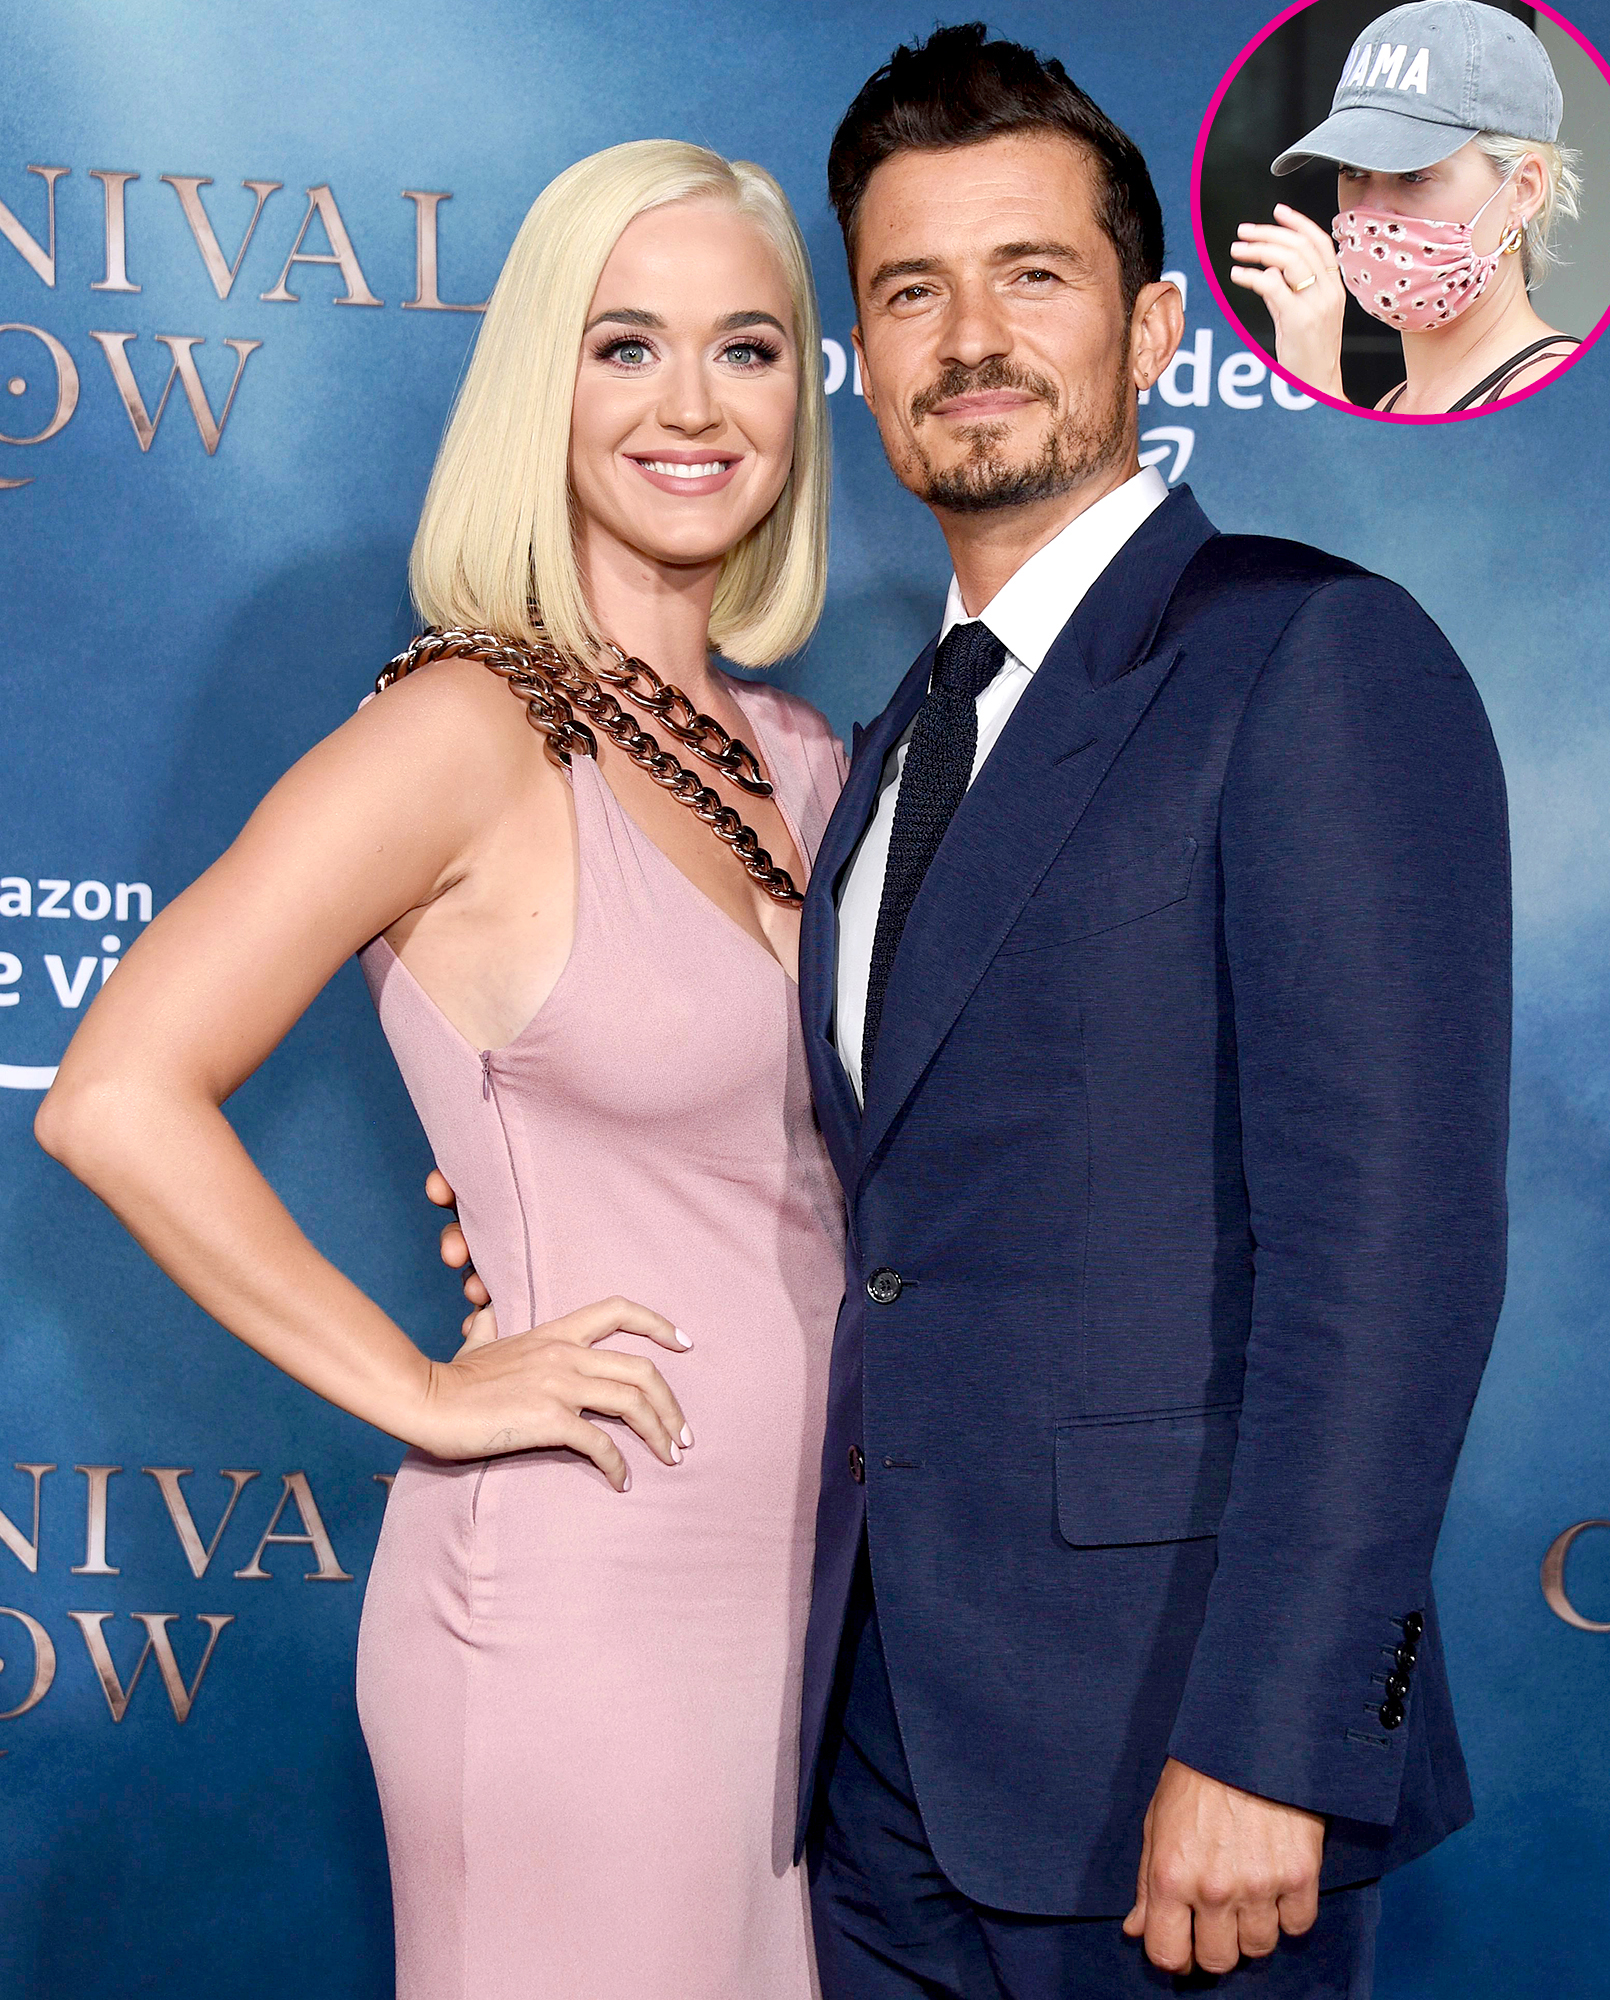 Cap Katy Perry Porn - Katy Perry Sparks Orlando Bloom Wedding Rumors With Gold Ring: Pics